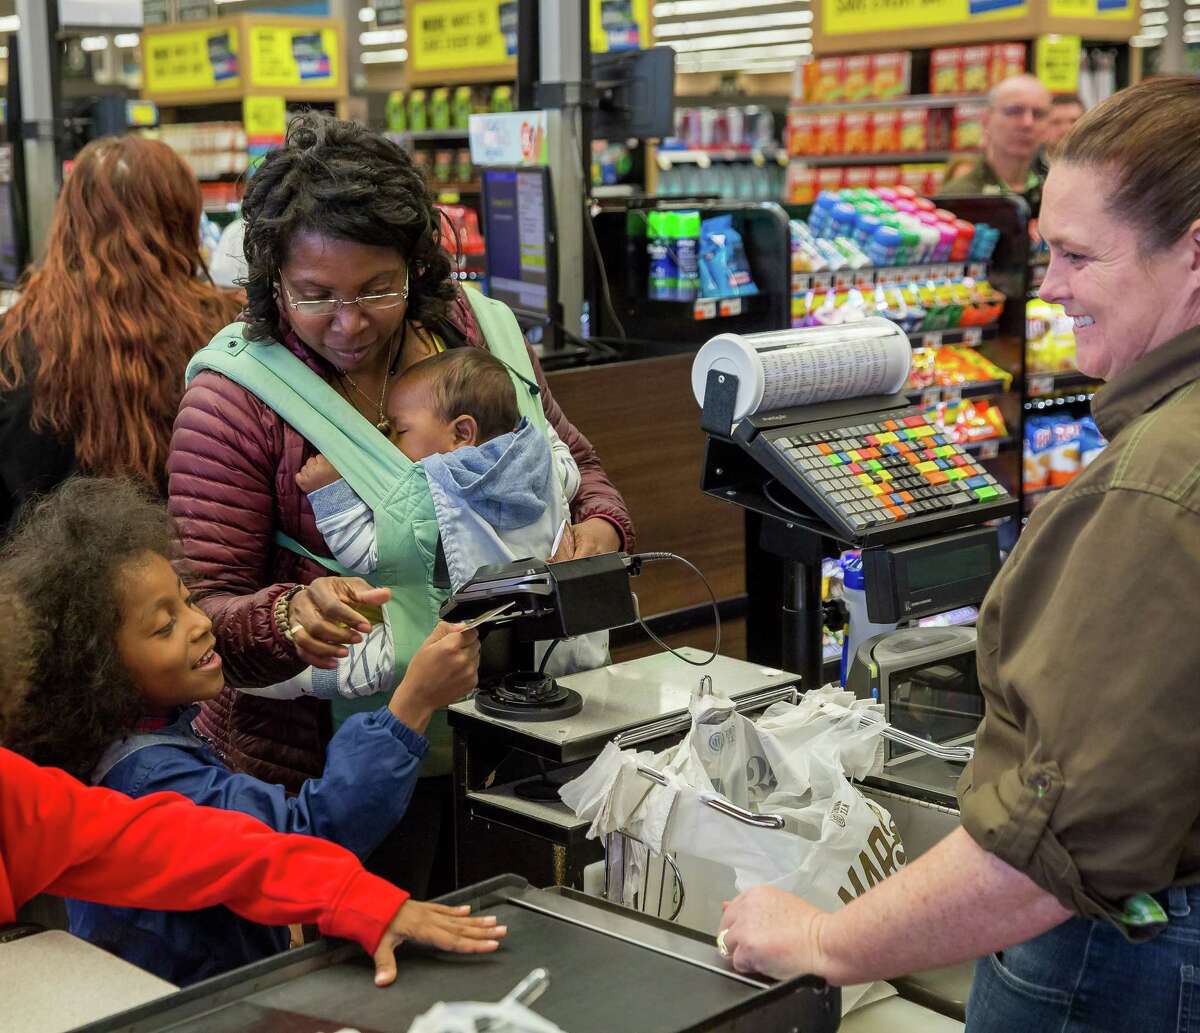 Weslene Newcomb, of Albany, tests the state's new eWIC card system at Market 32 in Albany, N.Y. on Monday, April 30, 2018. The local mom is the first New Yorker to try the card, which state health officials say is more discreet than the paper checks that have historically been used to pay for WIC foods. (Photo by Mike Wren / New York State Health Department)